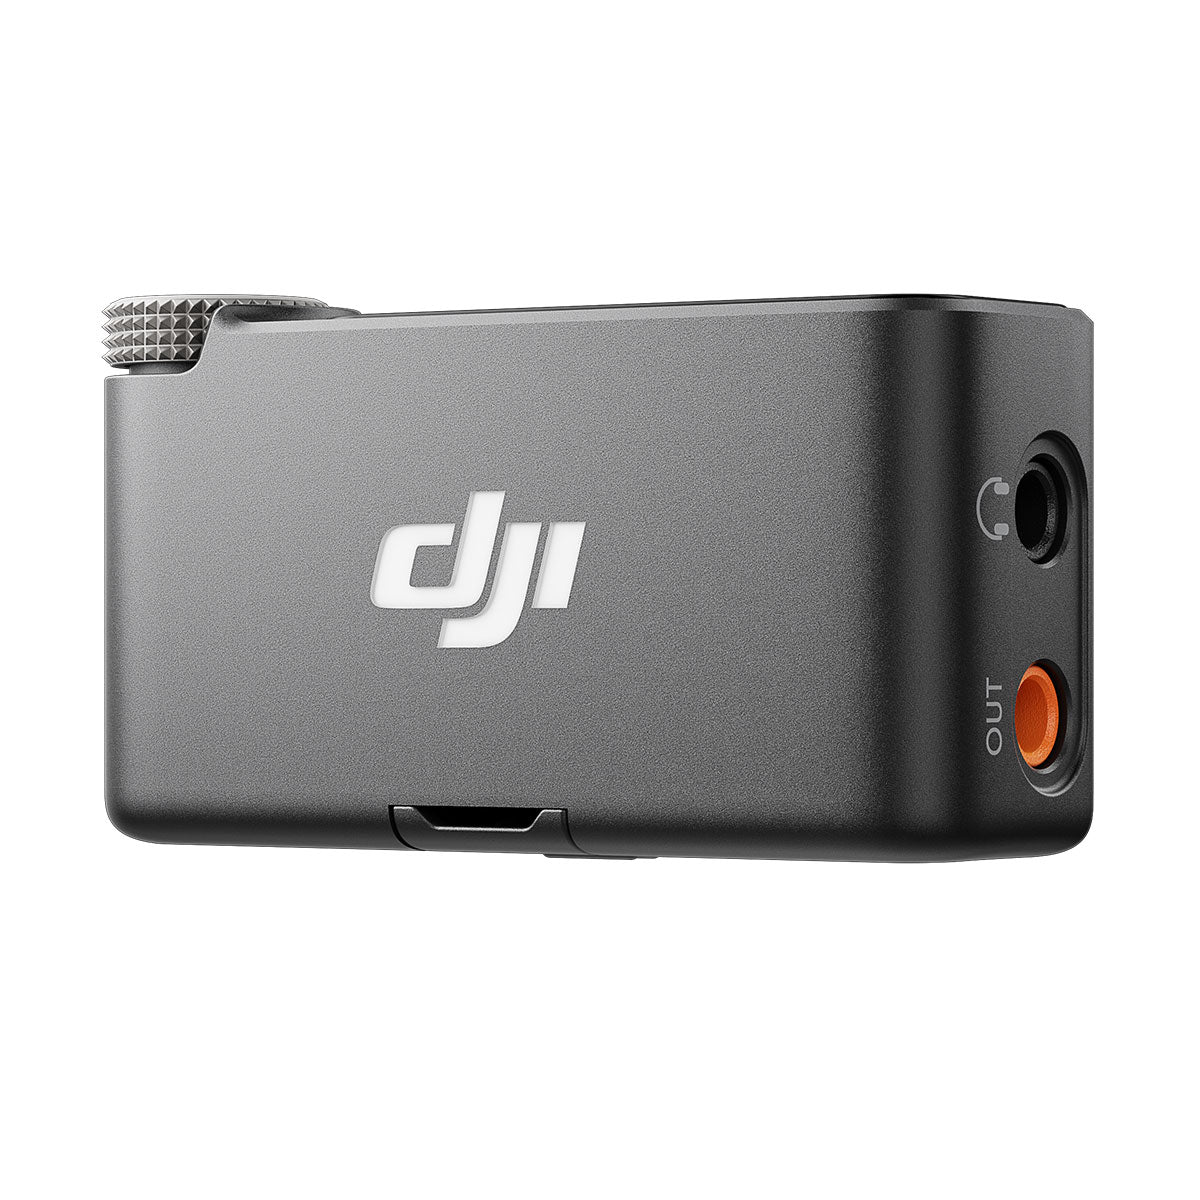  DJI Mic 2 (1 TX + 1 RX), Wireless Microphone with Intelligent  Noise Cancelling, 32-bit Float Internal Recording, Optimized Sound, 250m  (820 ft.) Range, Microphone for iPhone, Android, Camera, Vlogs : Electronics